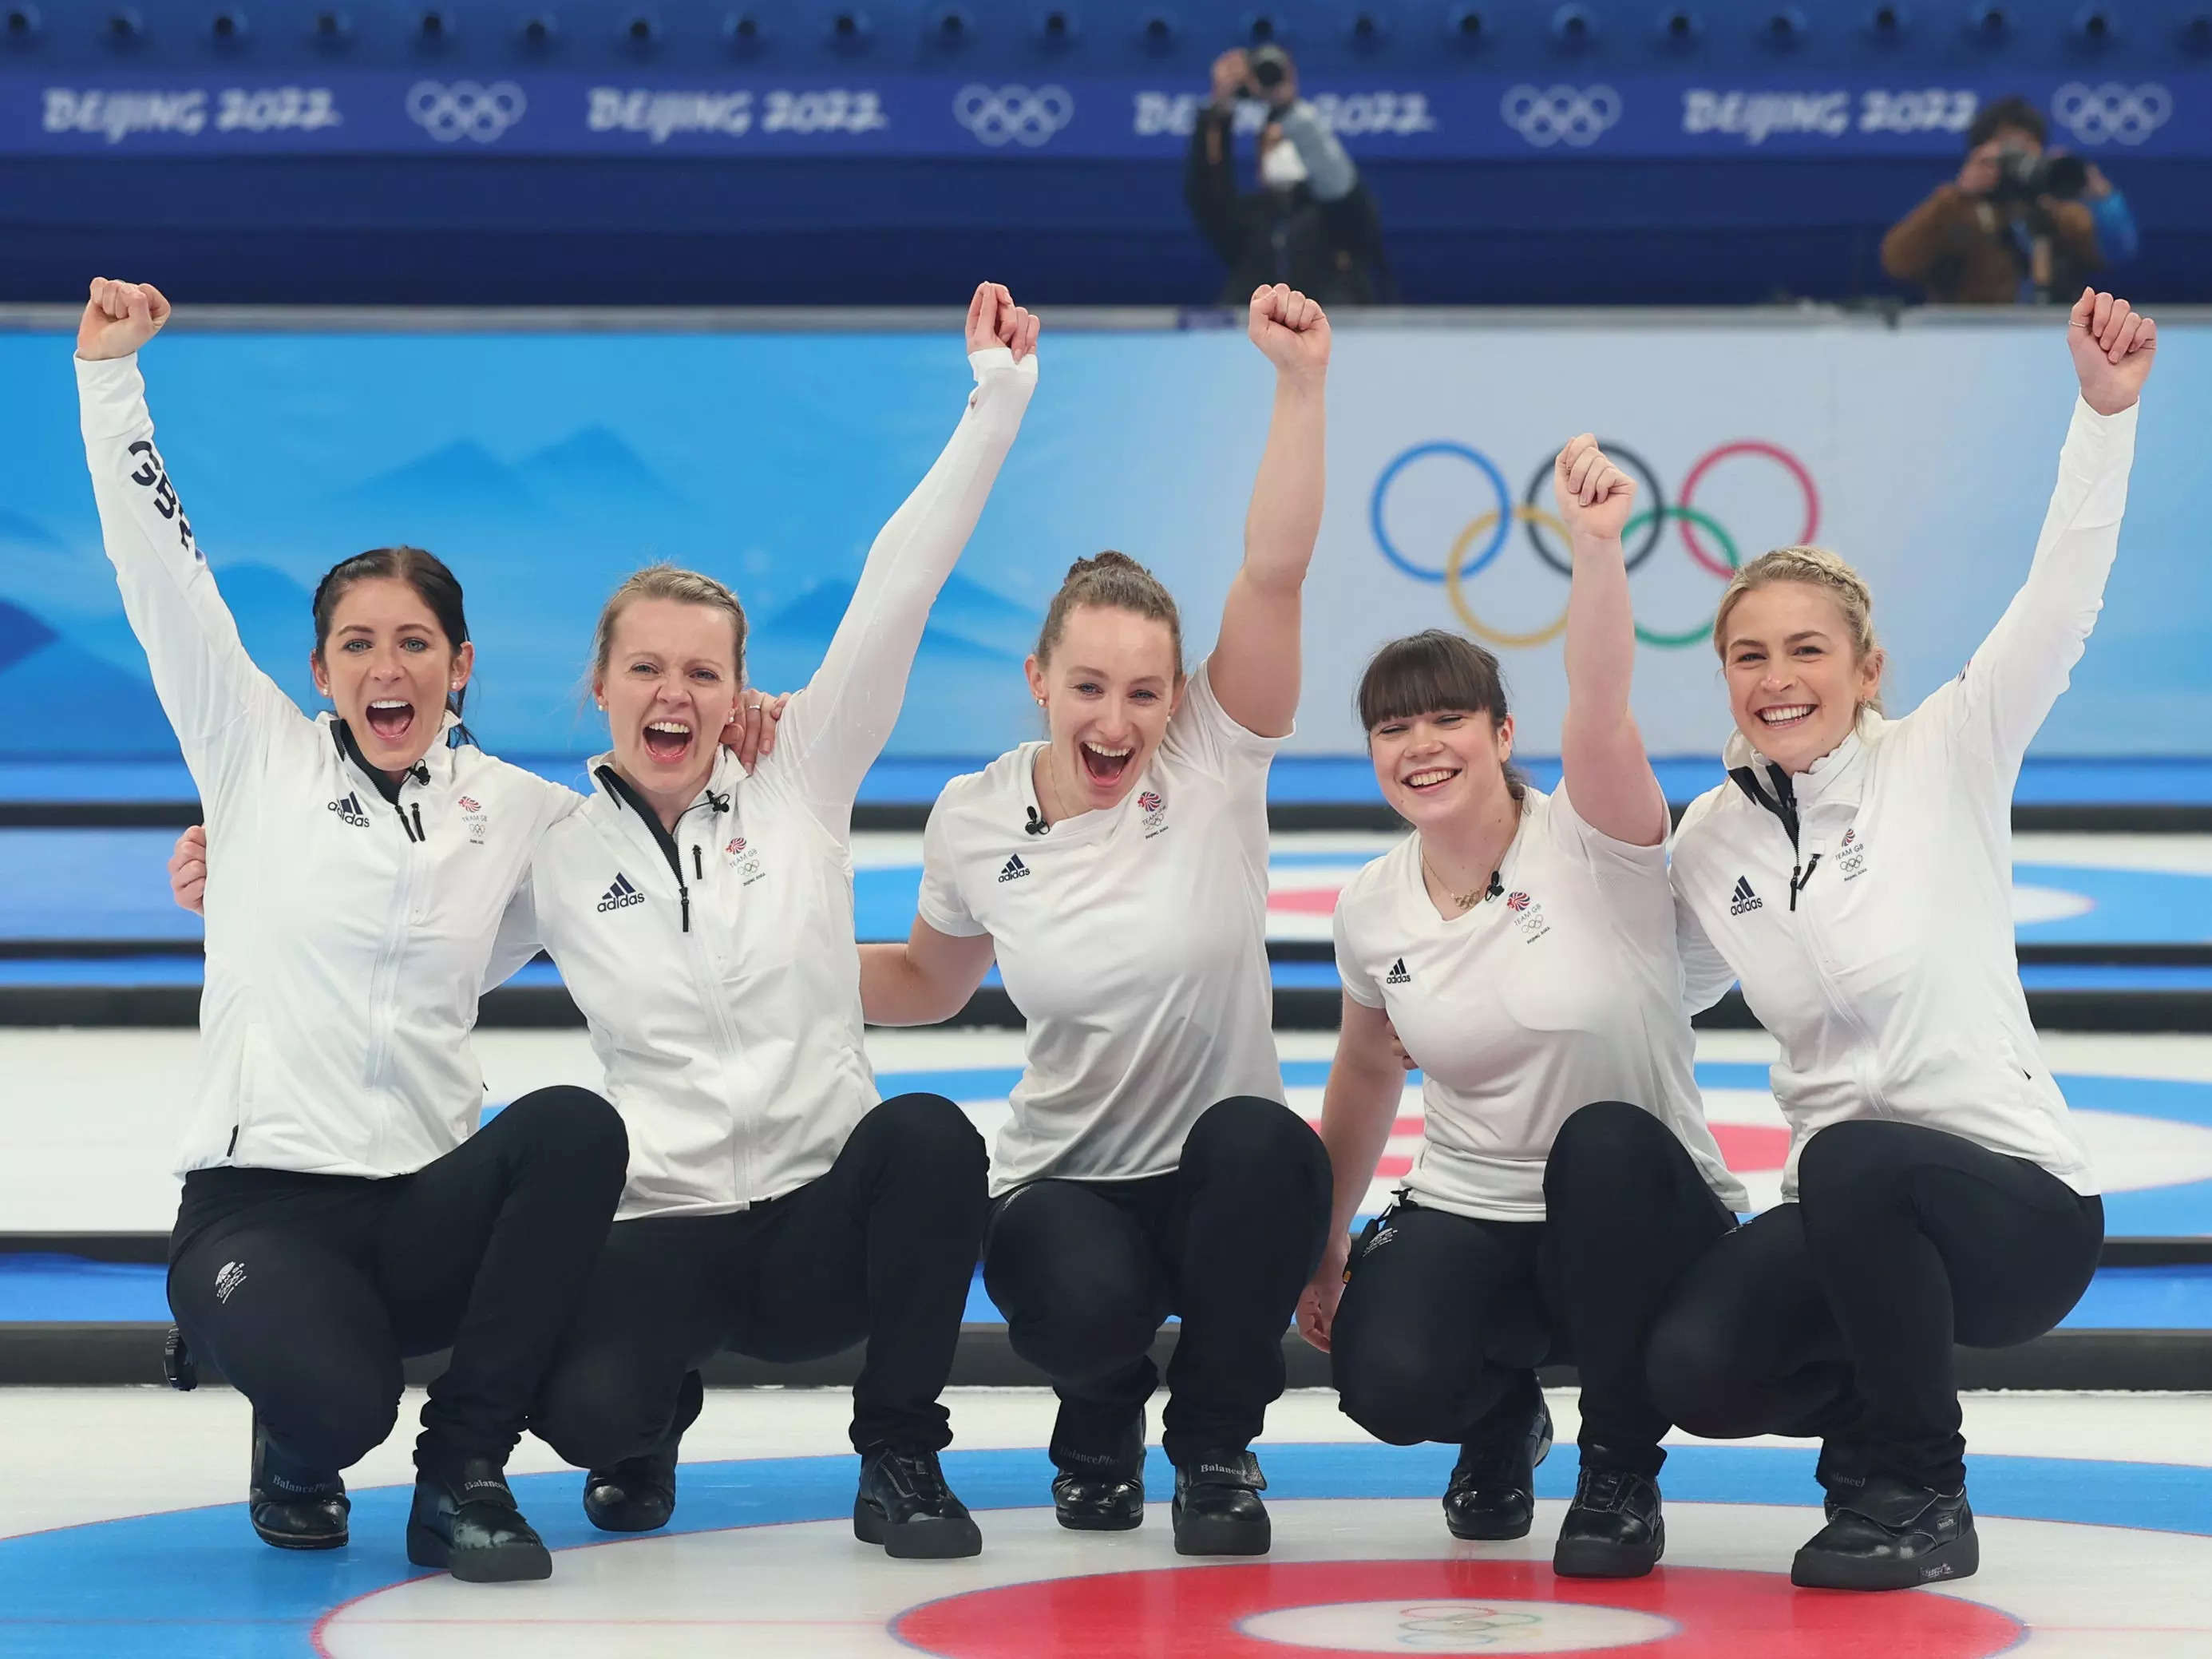 Team Great Britain celebrate after defeating Team Japan in the Women